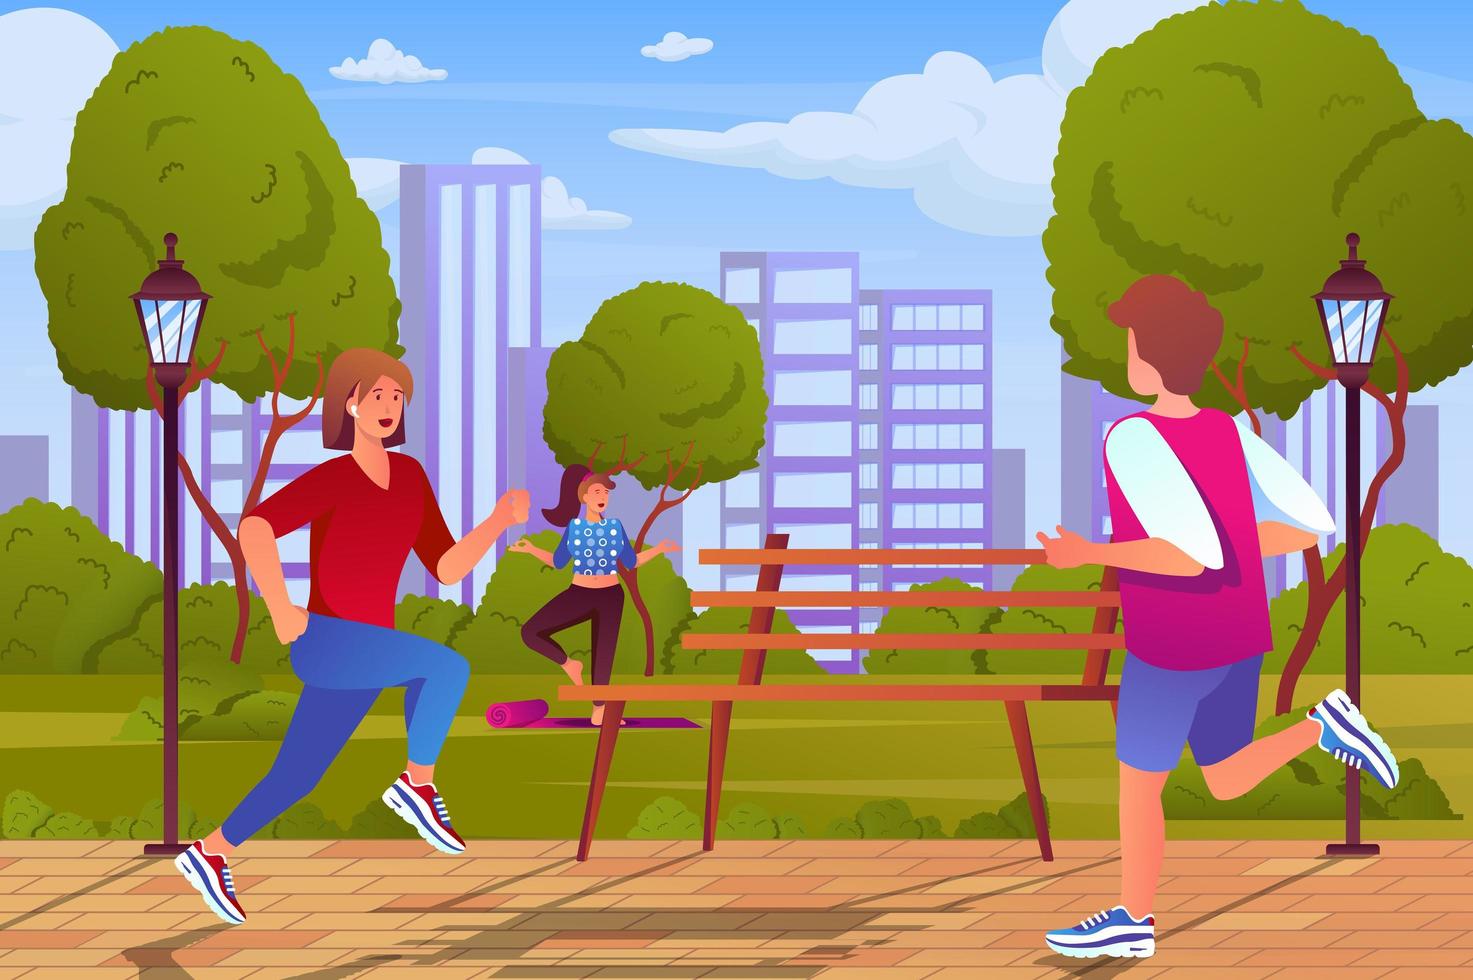 Outdoor workout concept in flat cartoon design. Men and women train in city park, run or do yoga asanas. Healthy lifestyle and sports activities. Vector illustration with people scene background